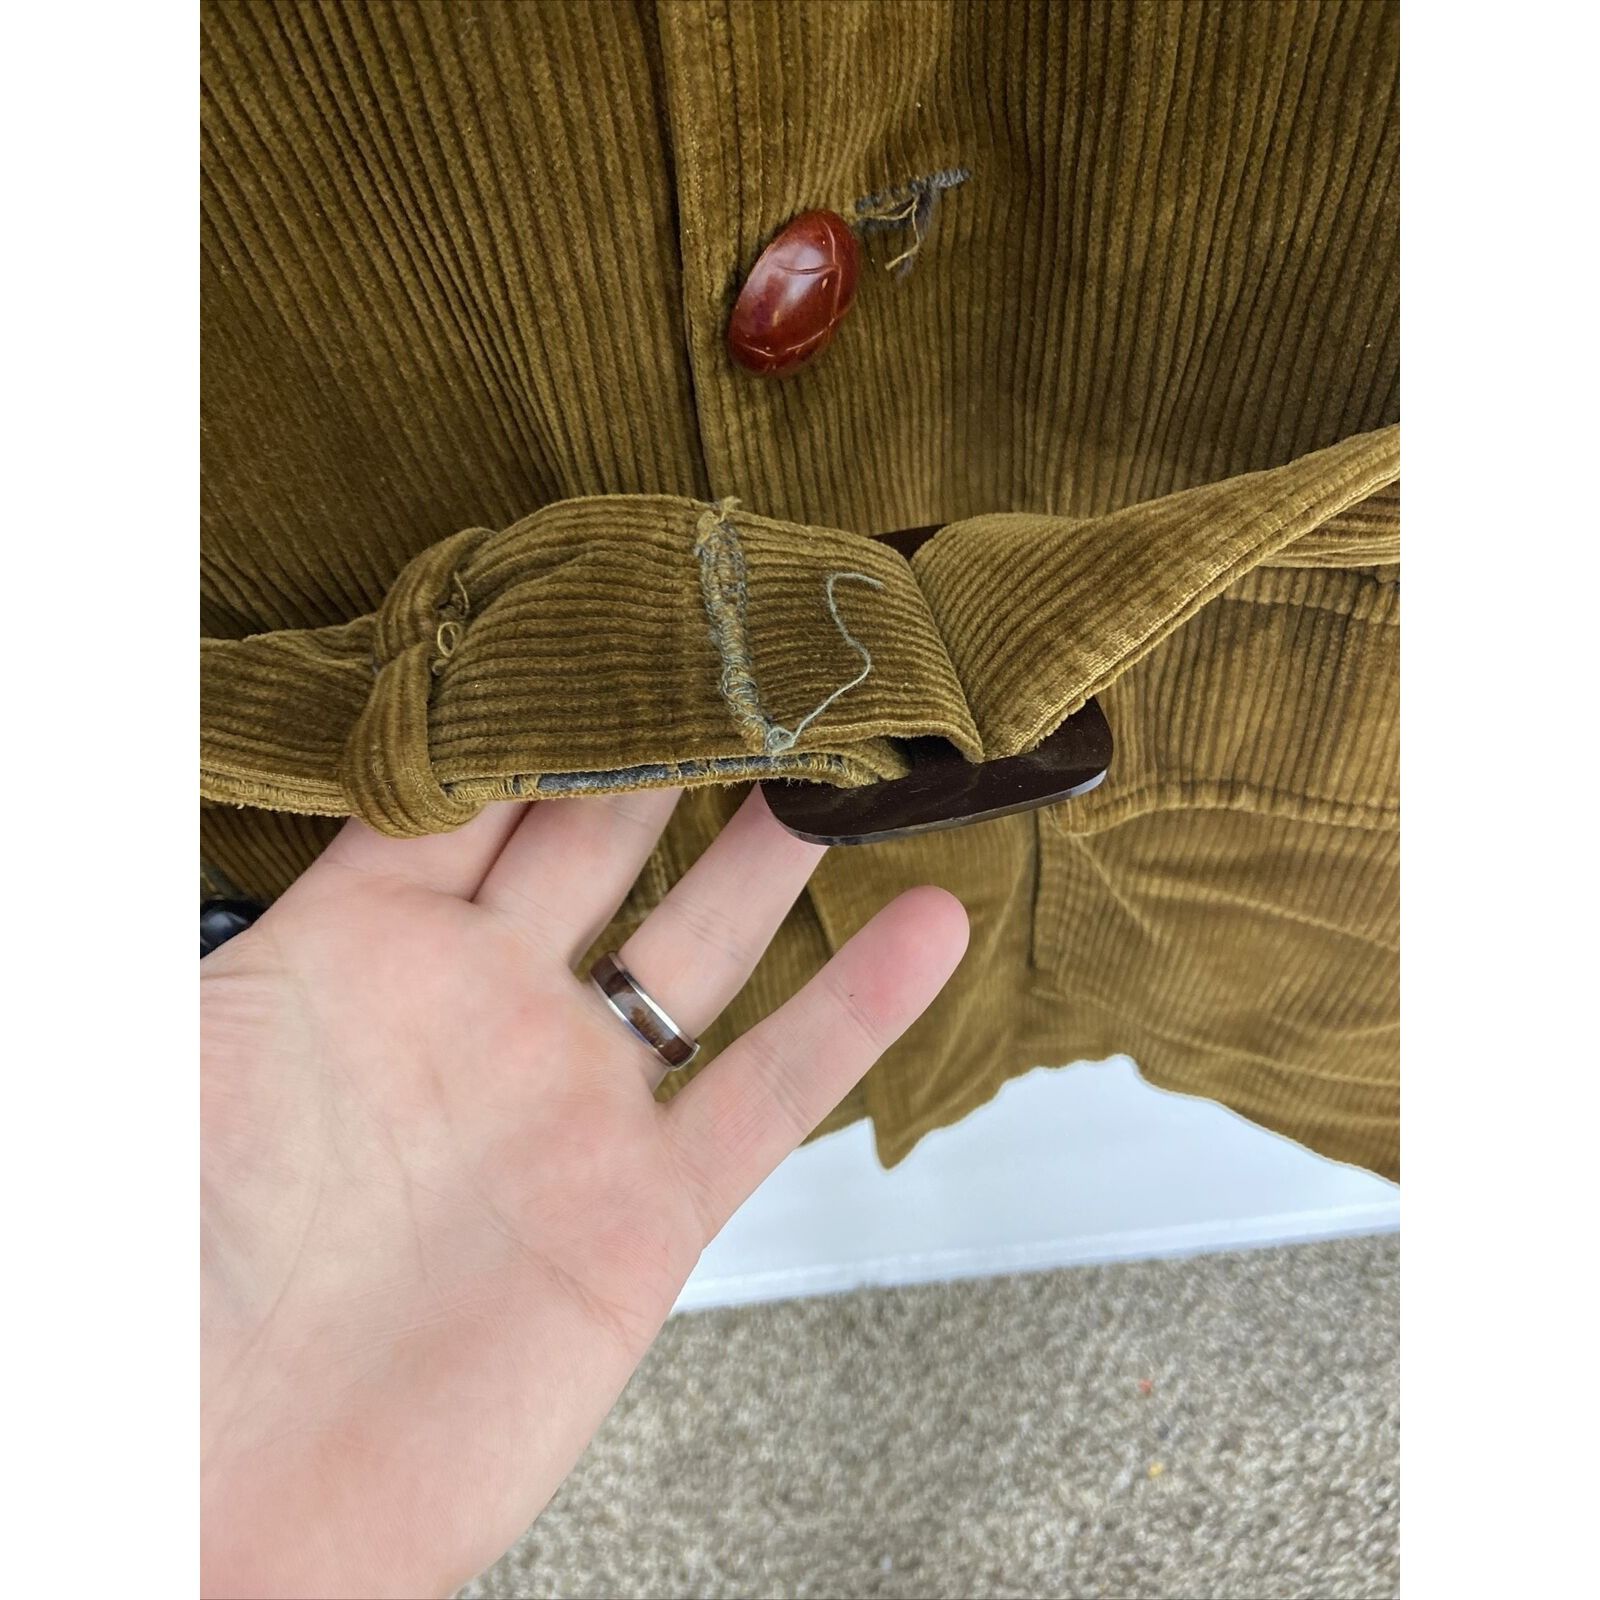 Field And Stream Vintage Field and Stream Men 40 S/M Corduroy Hunting Coat Size US M / EU 48-50 / 2 - 7 Thumbnail